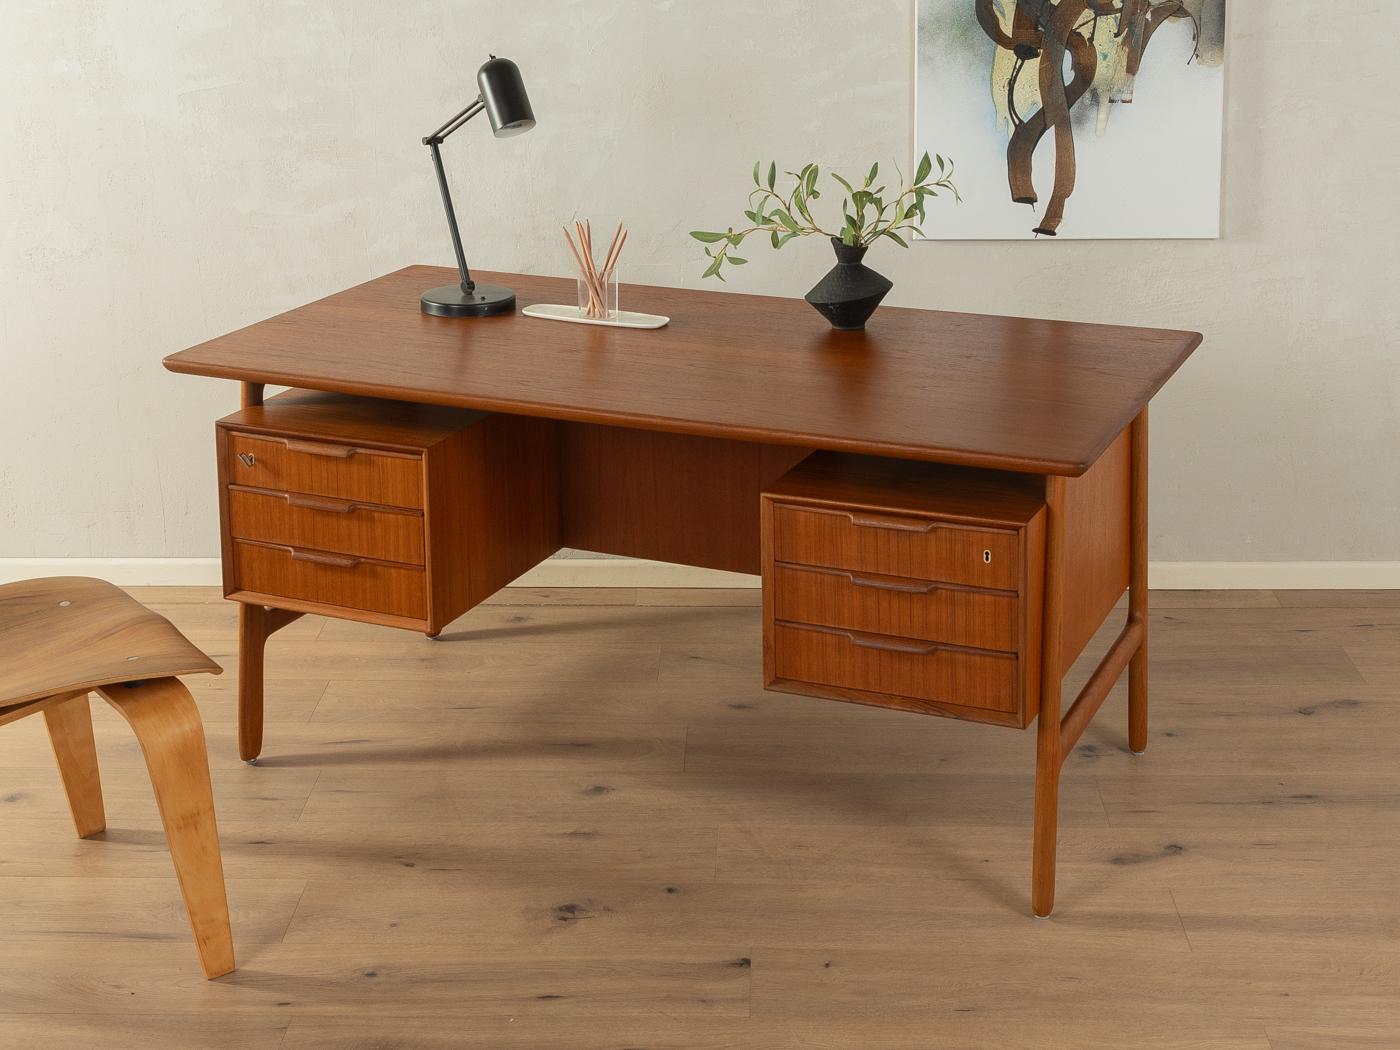 Classic freestanding desk model Nr. 75 from the 1960s by Omann Jun. High-quality corpus in teak veneer with a floating table top, six drawers, a hinged door and two bookcases on the rear and solid wood legs.
Quality Features:

    accomplished